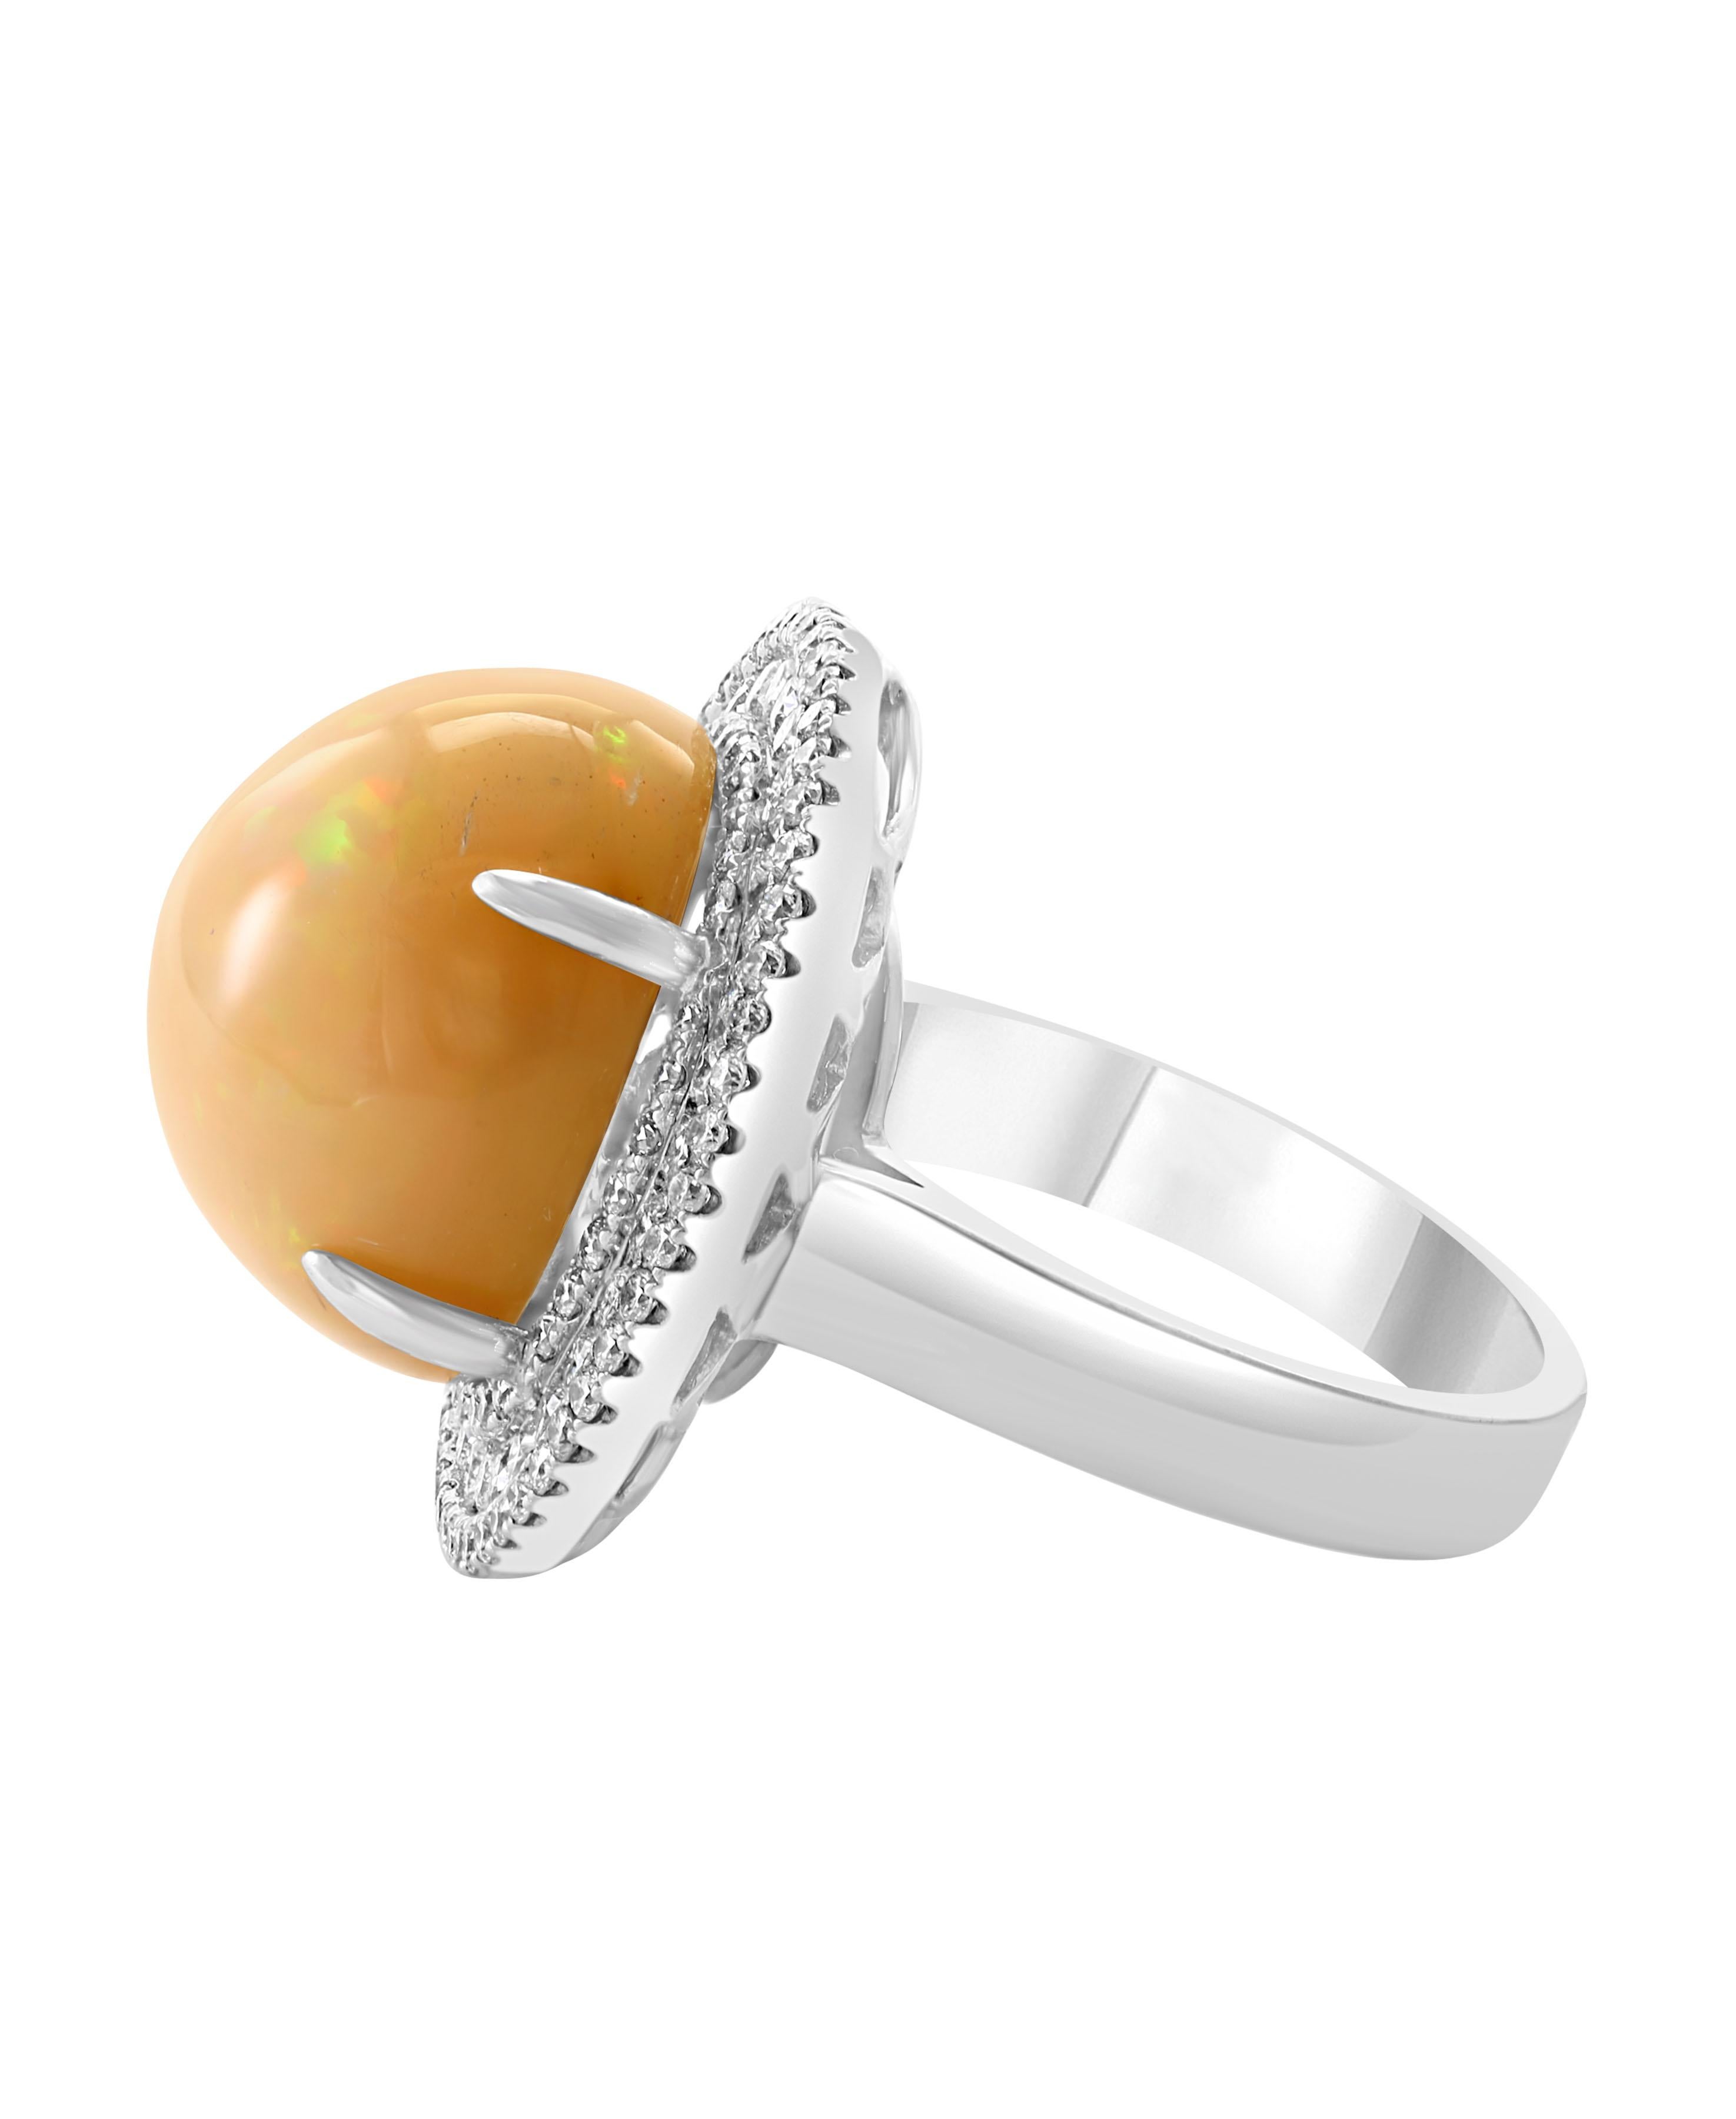 Round Natural Opal  Cocktail Ring   with Diamonds all around the stone 
18 Karat White  Gold Estate
 Approximately 16 mm Round
A classic, Cocktail ring 
Huge Opal very clean no inclusion  in round shape , full of luster and shine  and shades of